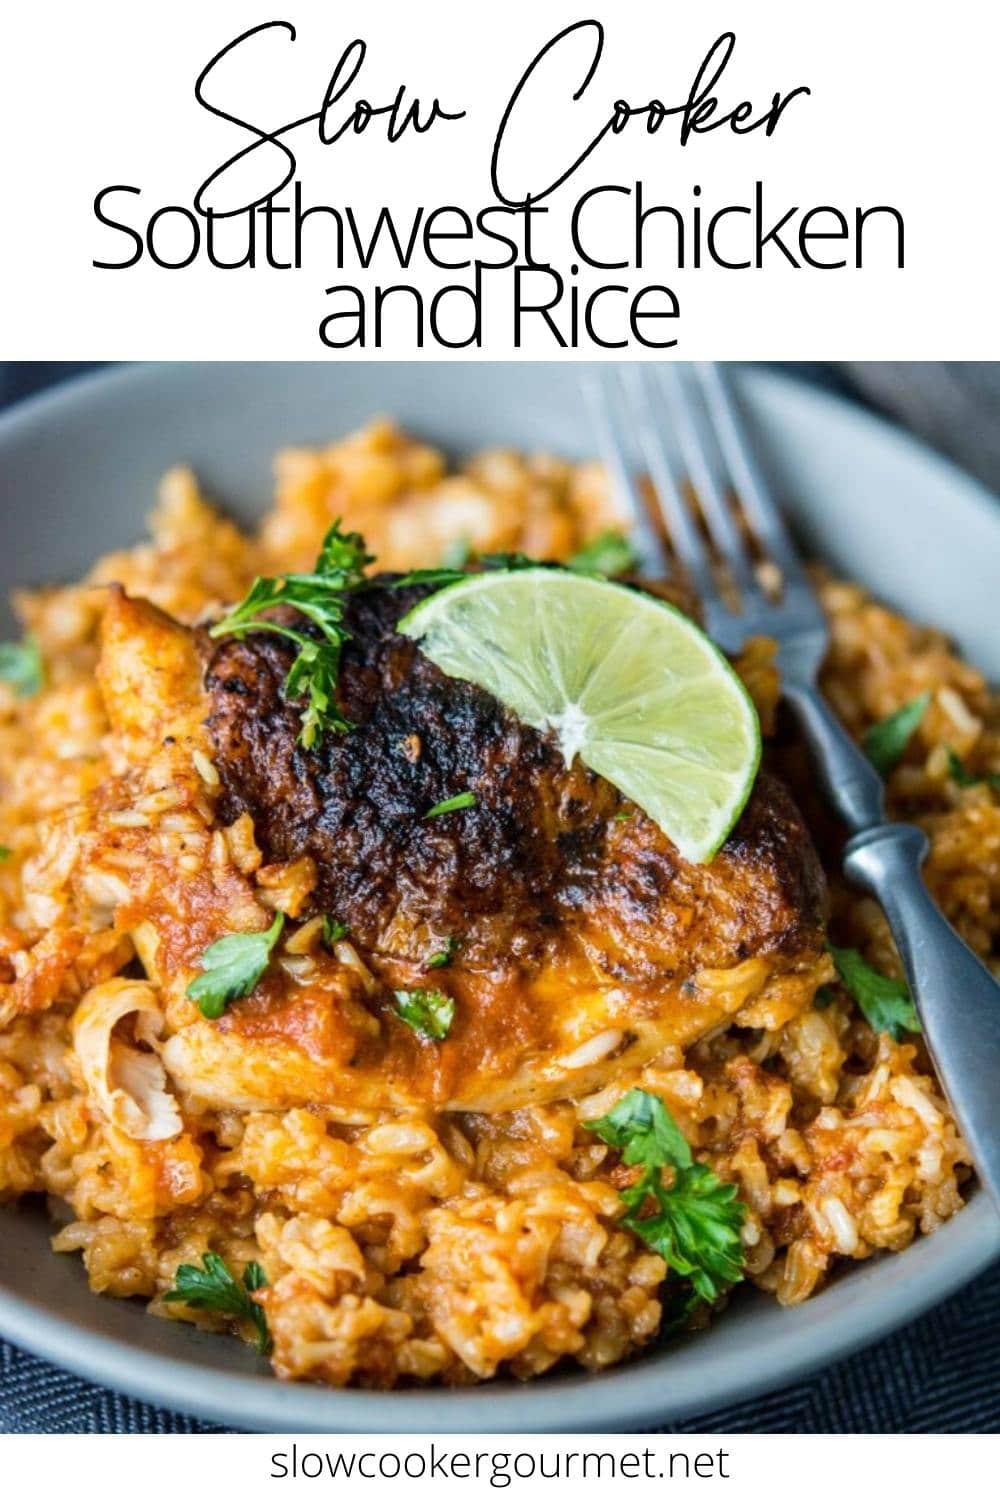 Slow Cooker Southwest Chicken and Rice - Slow Cooker Gourmet